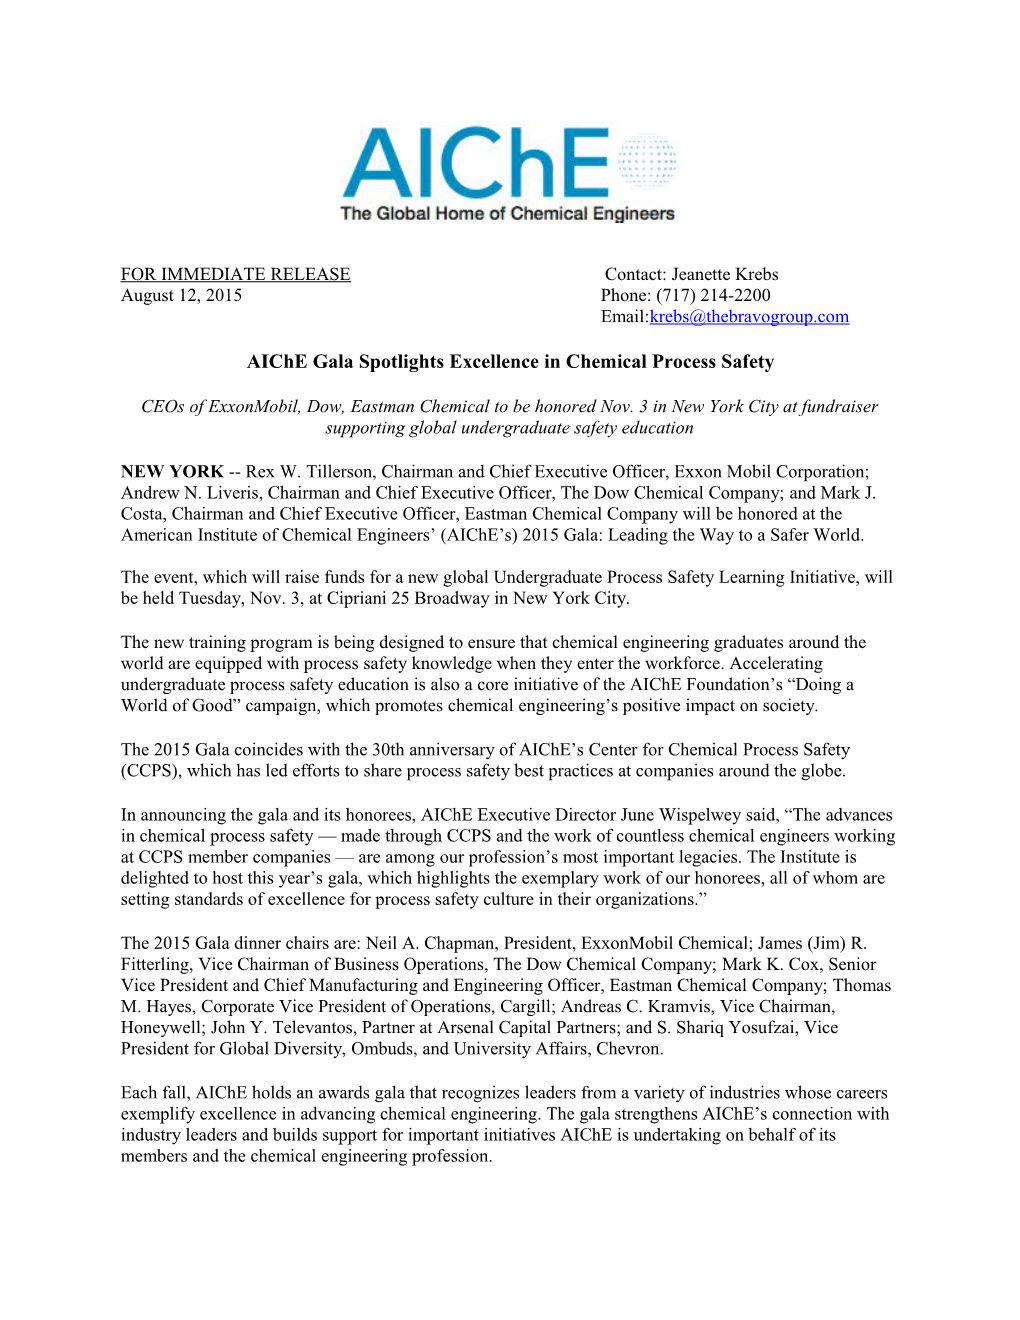 Aiche Gala Spotlights Excellence in Chemical Process Safety